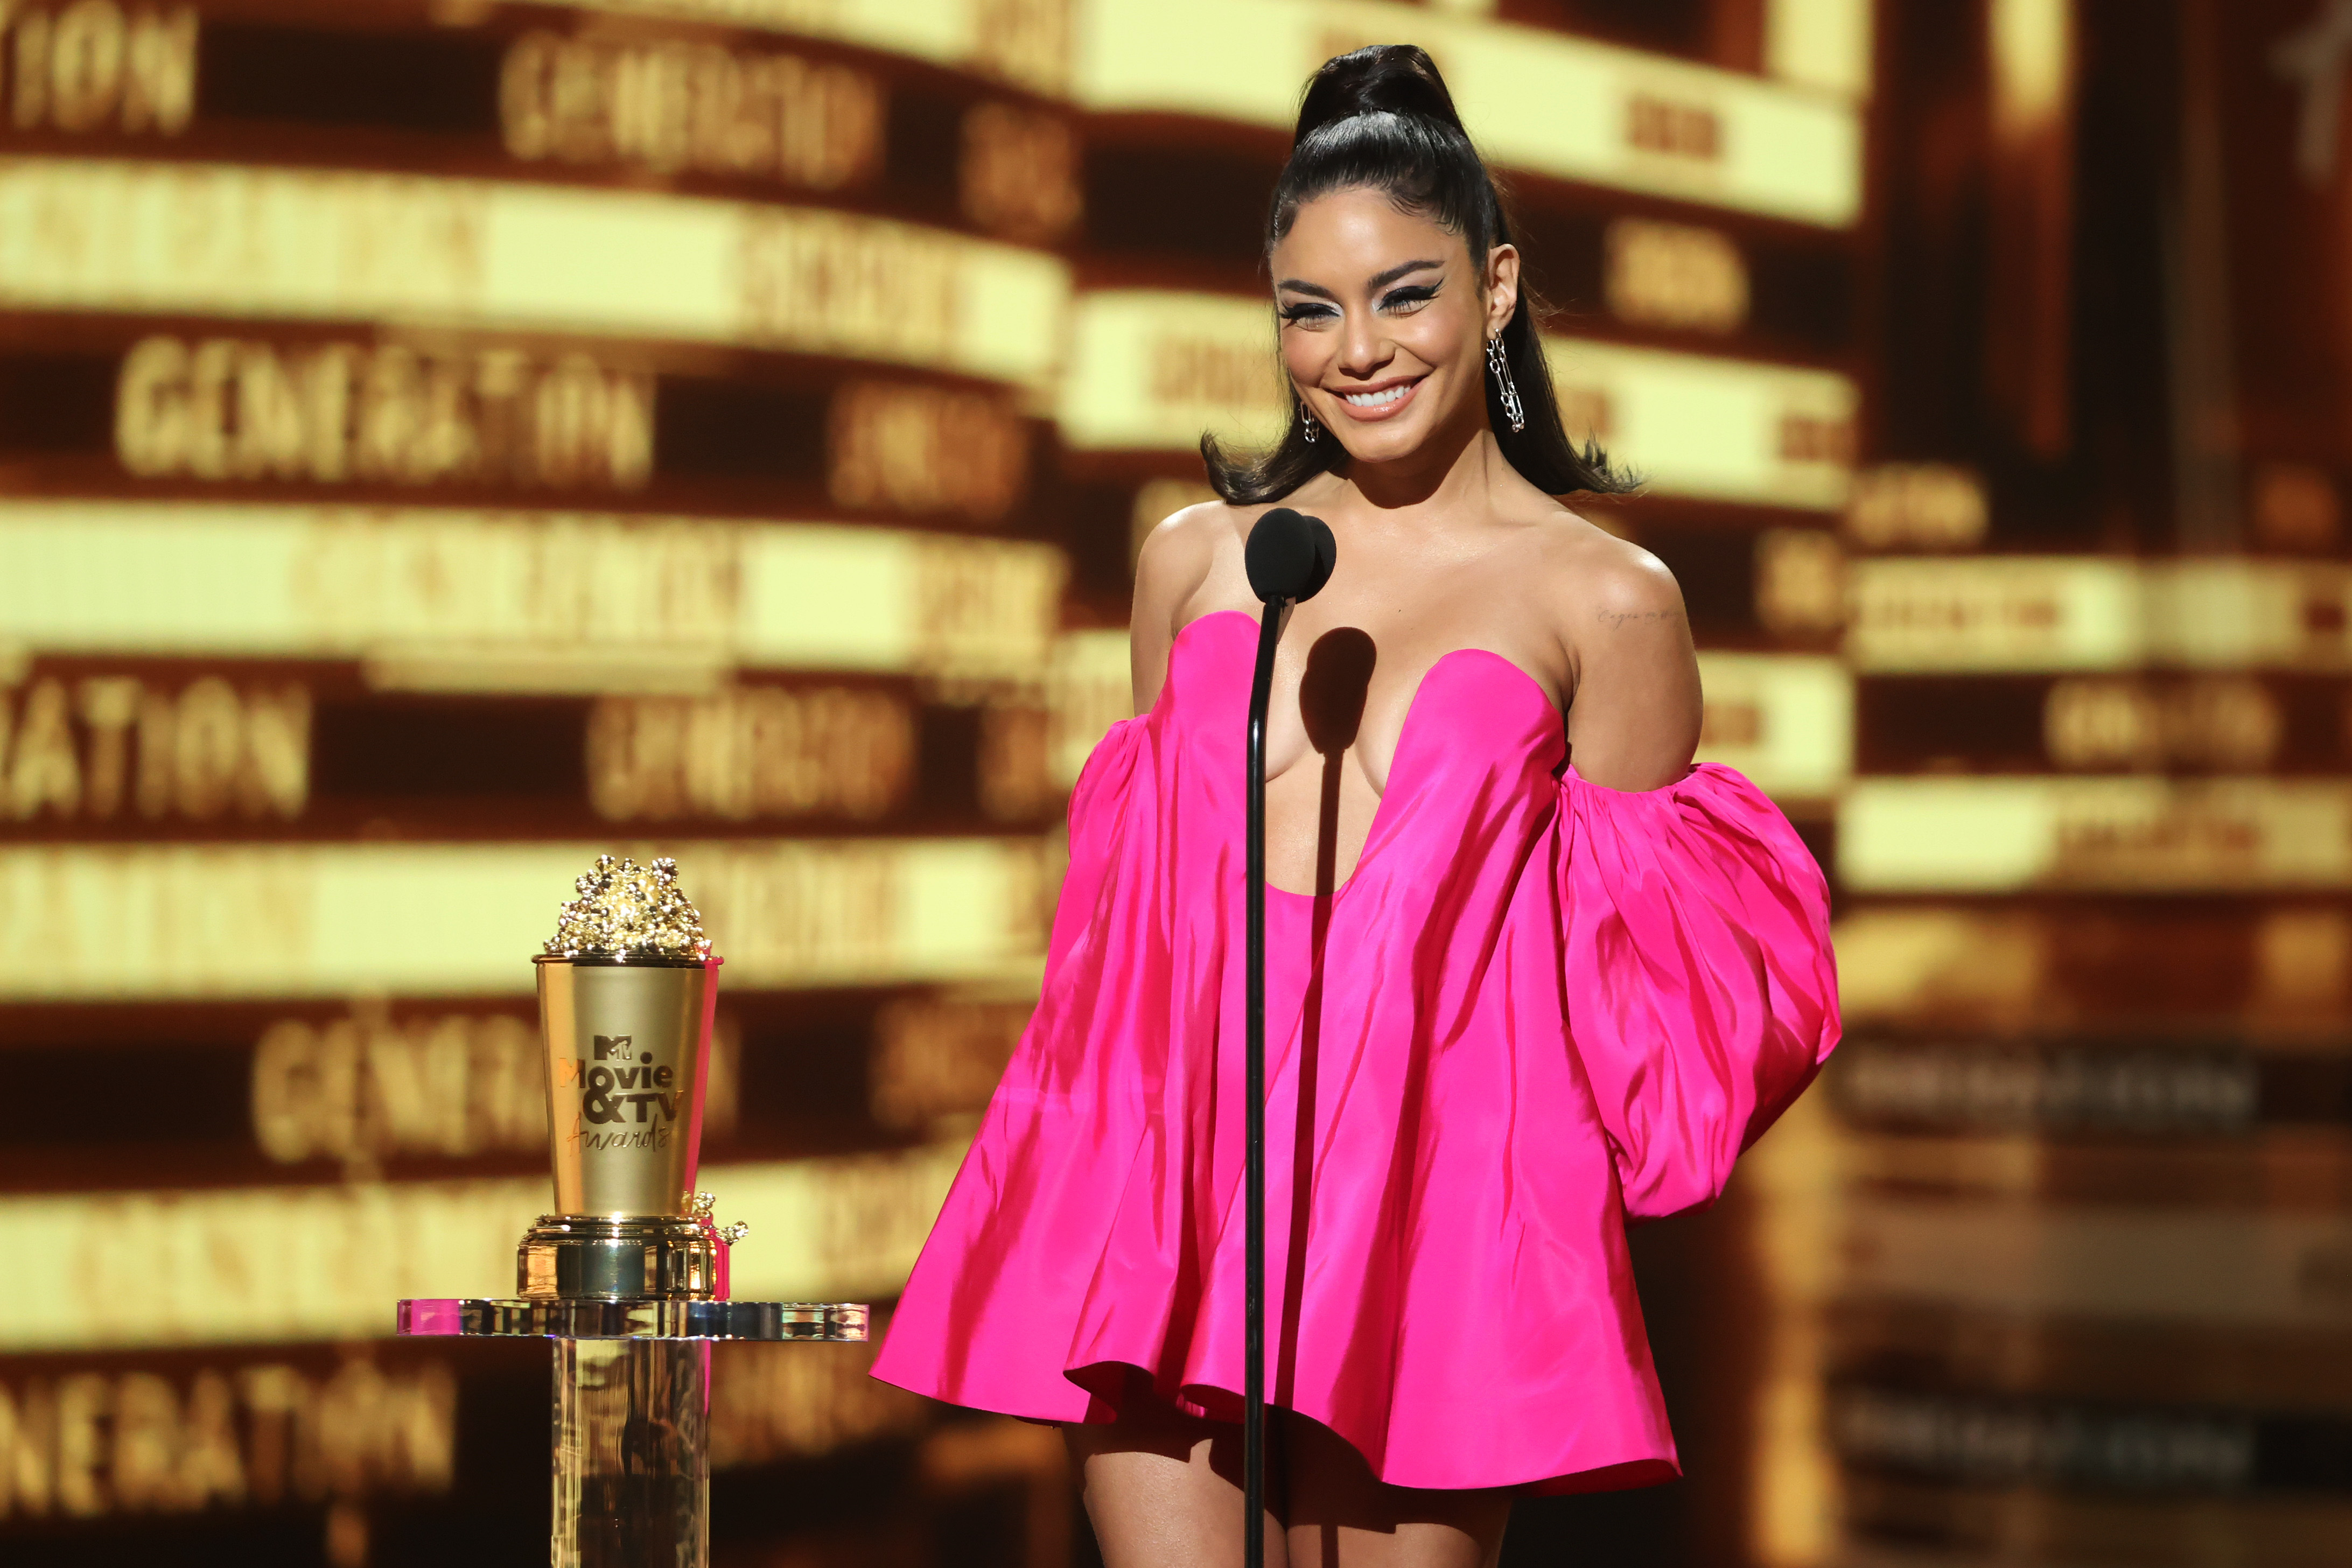 Vanessa Hudgens presenting the 2022 MTV Movie Awards. She wears a pink puff-sleeved dress